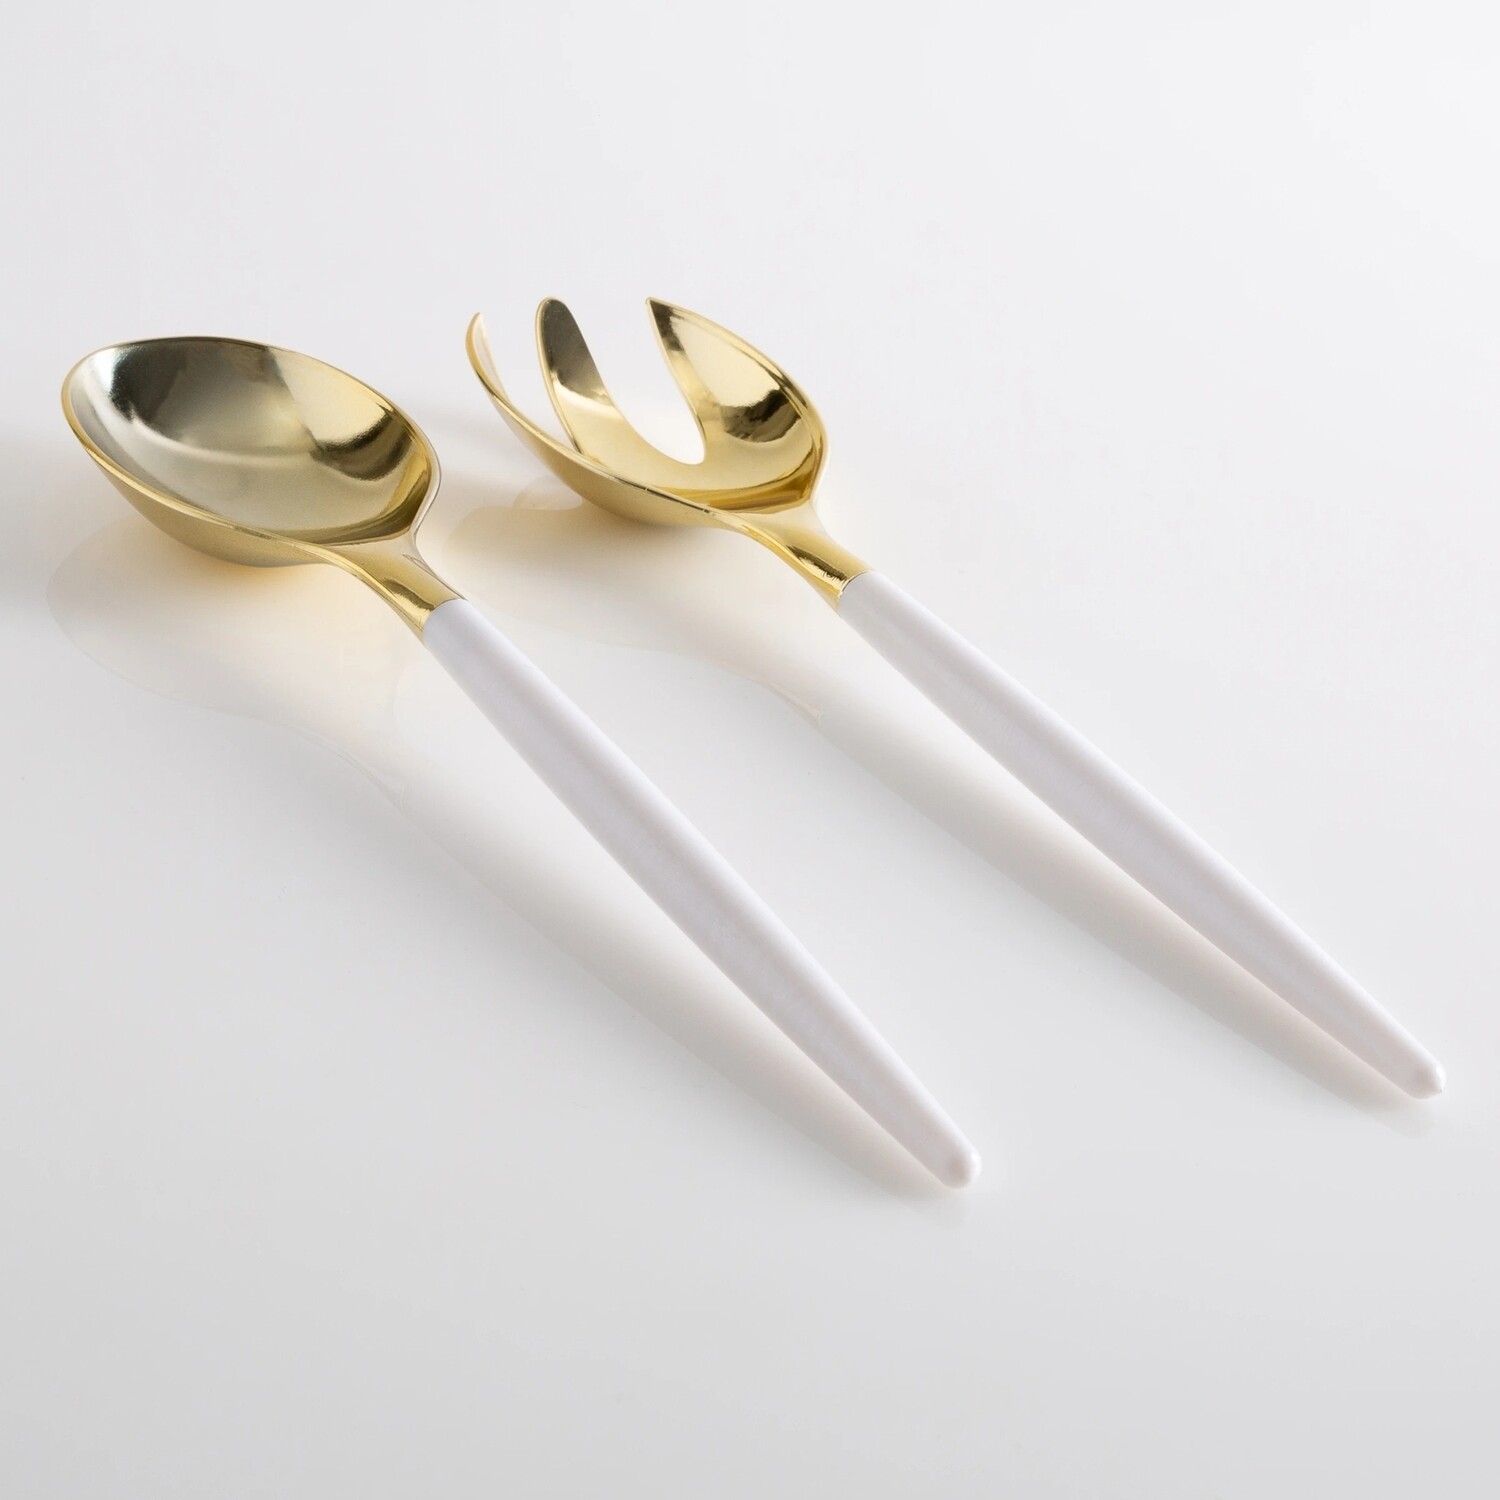 Luxe 2-Piece Serving Set Gold